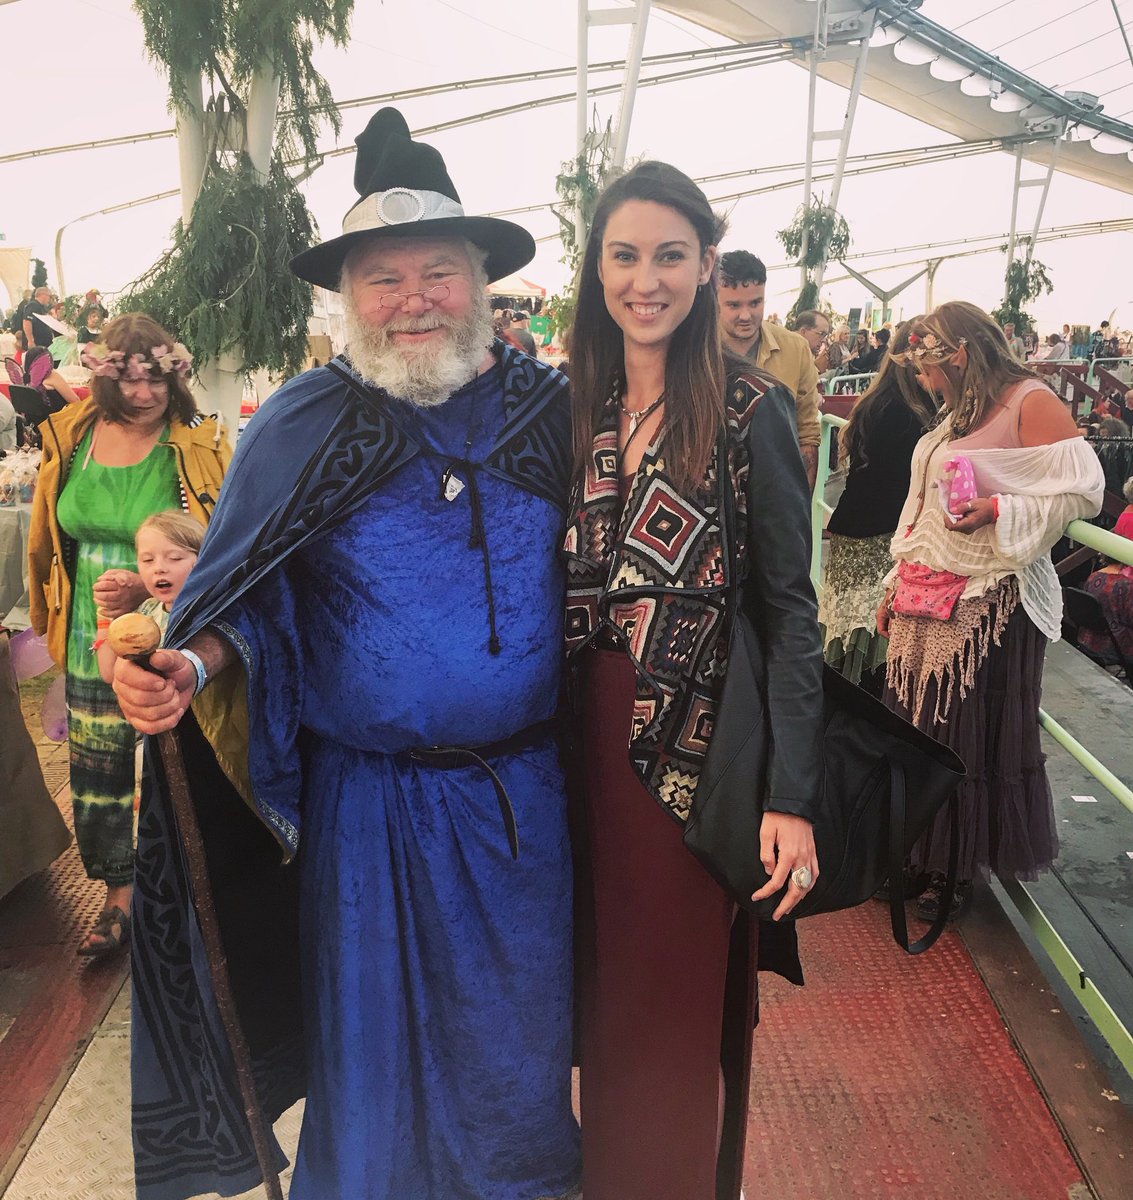 I recently met a wizard, and here’s what he said to me... 🧙‍♂️ 

‘Life is an adventure that is meant to be enjoyed, but don’t forget to take in the amazing experiences that are right in front of you.’

Thanks Mr Wizard!!
🧚‍♀️🦋💜 

#wizardwisdom